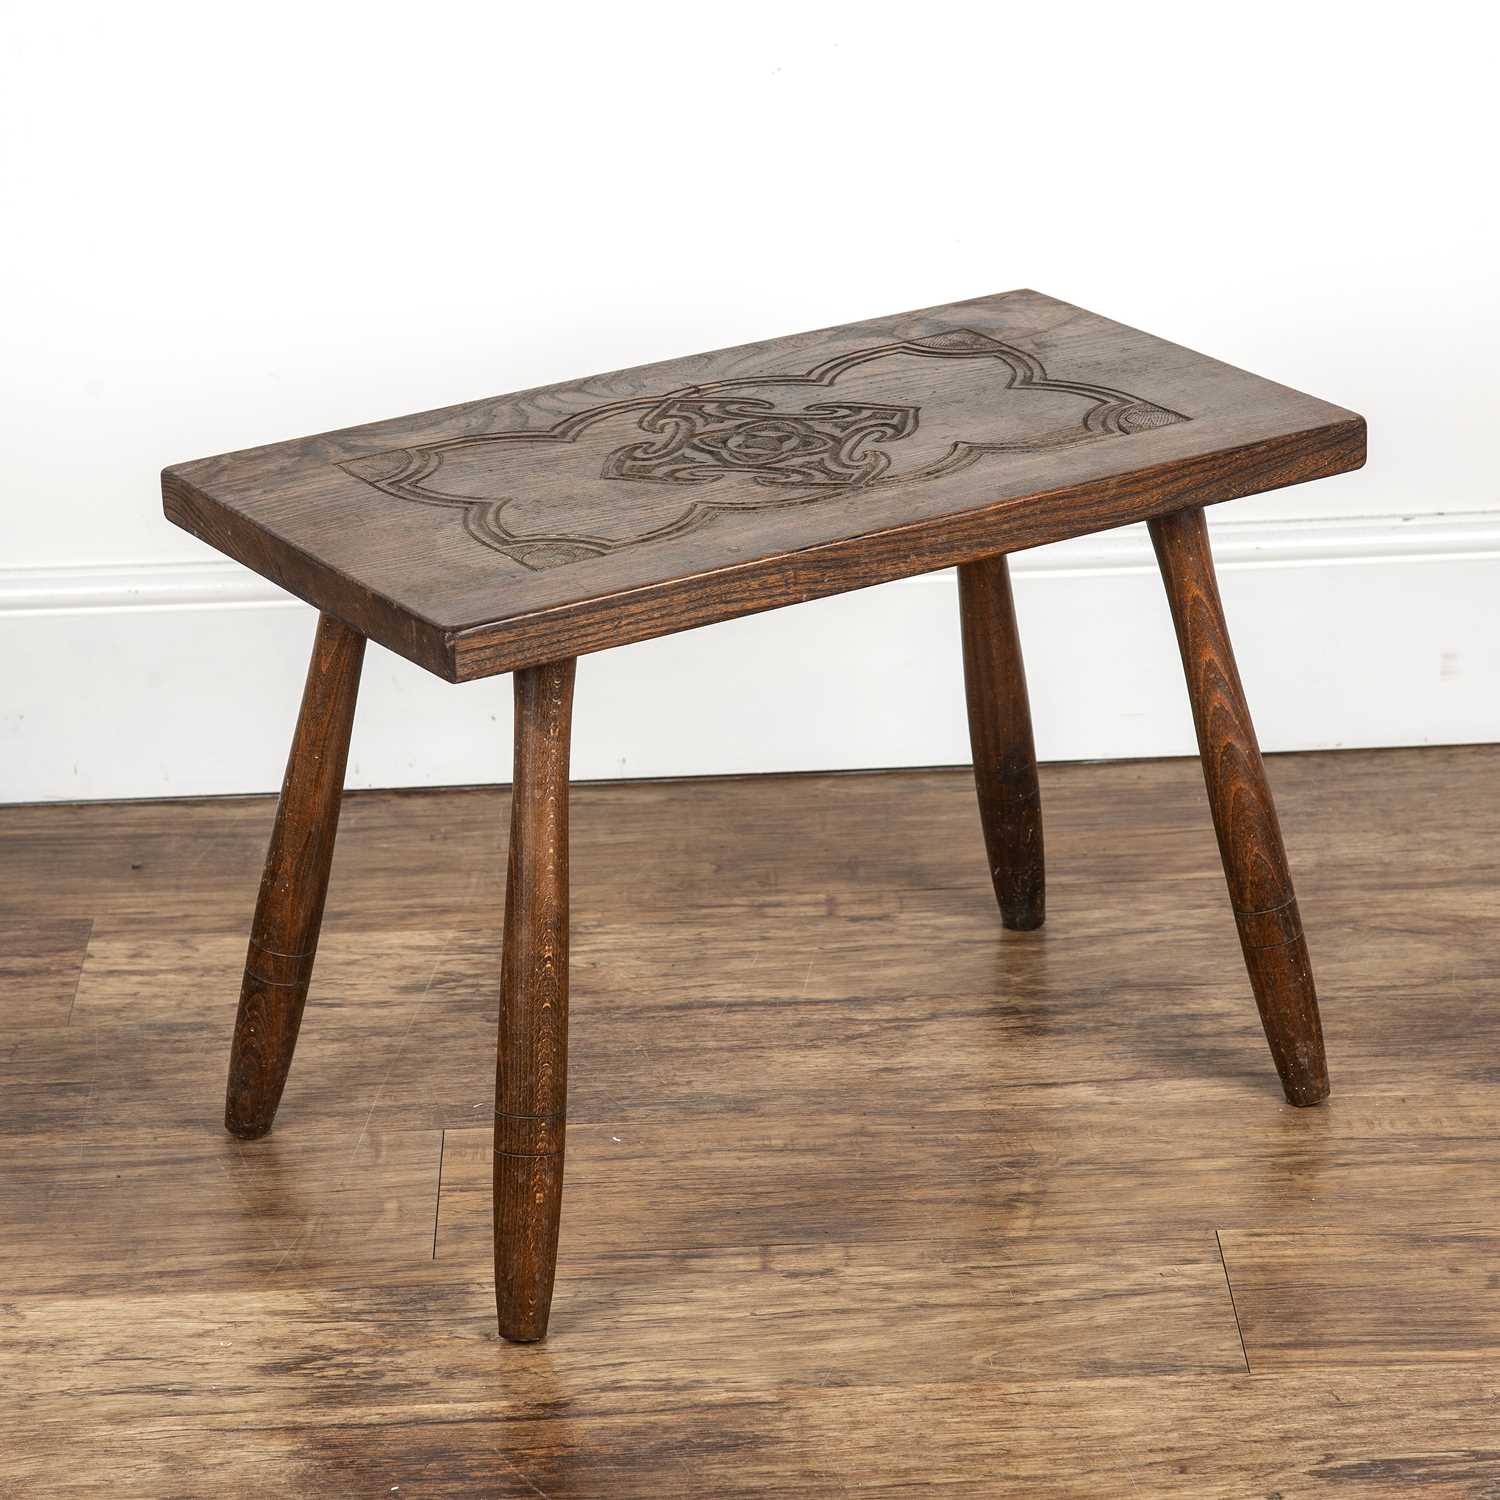 Cotswold School Elm, rectangular table with carved decoration to the top, 61cm wide x 43cm high x - Image 2 of 5